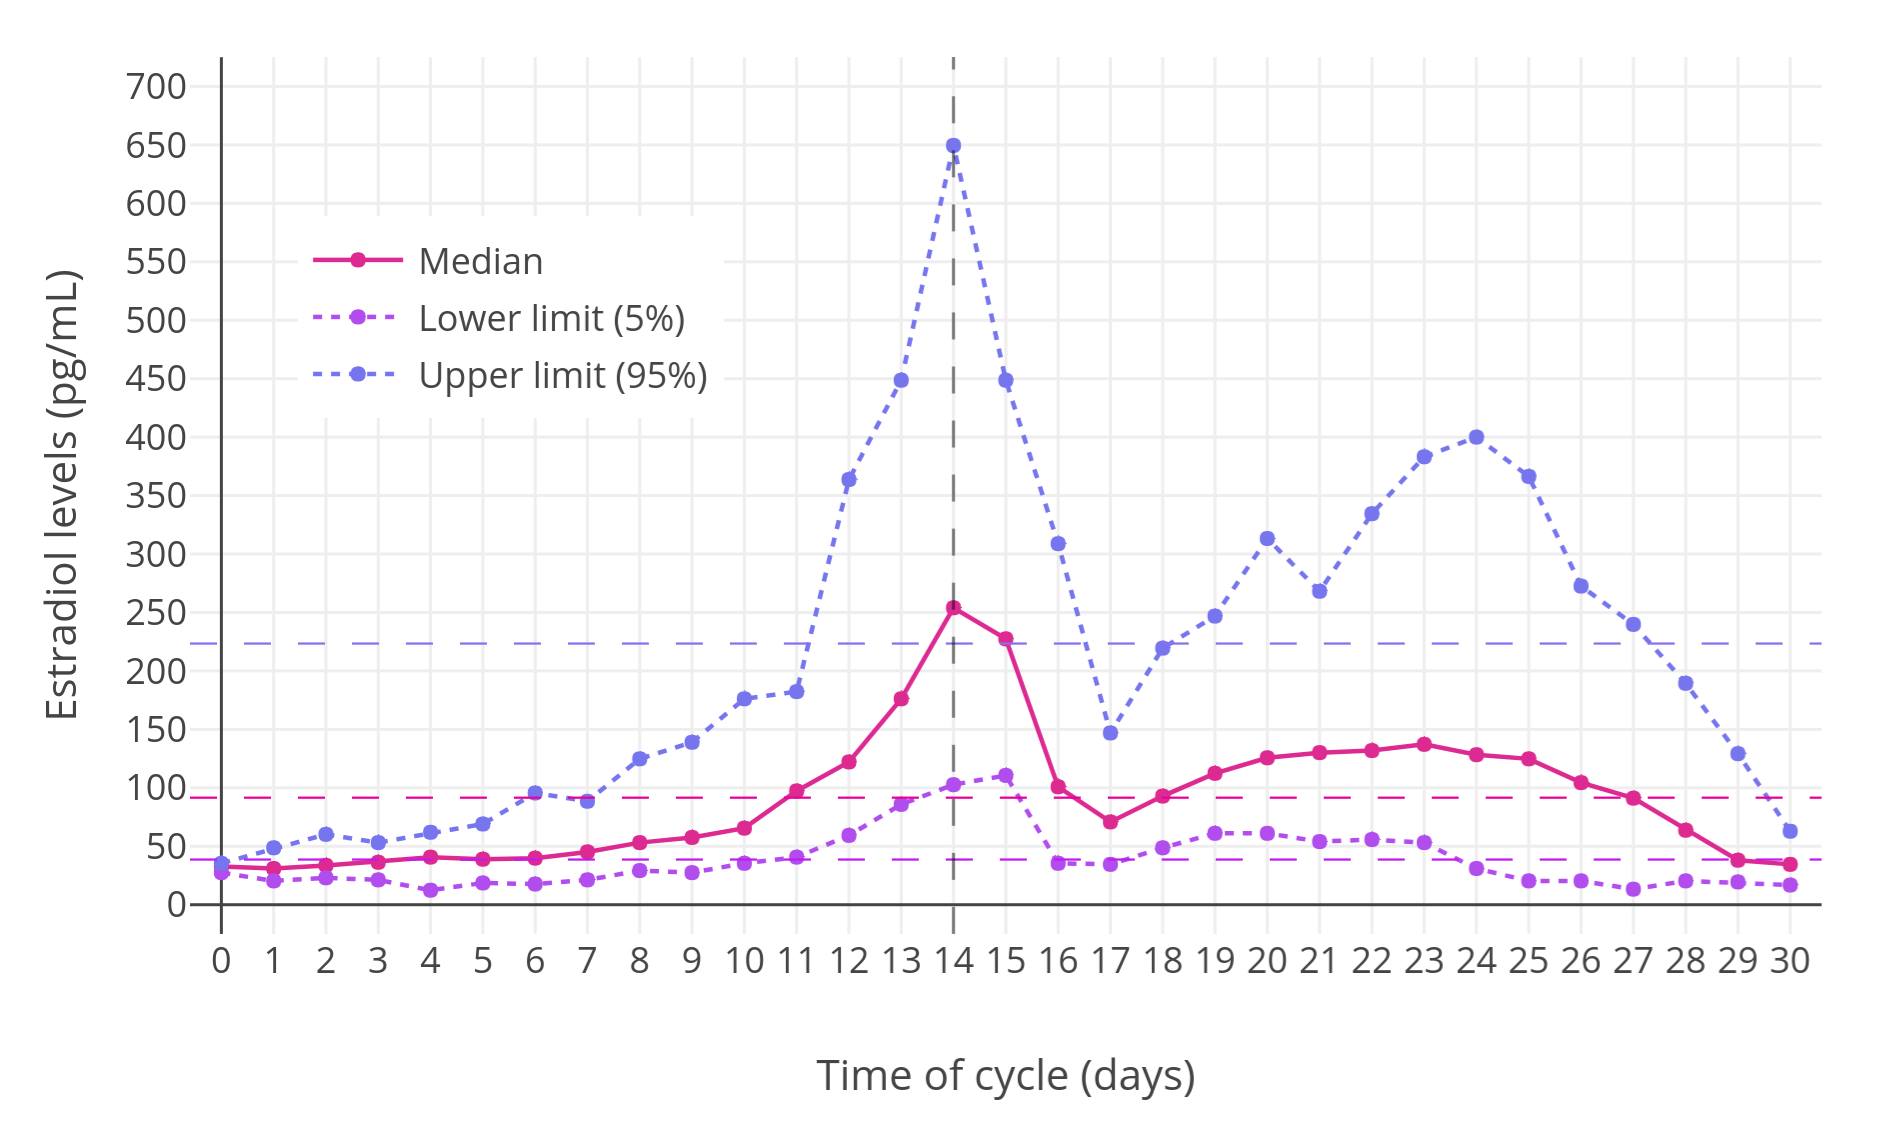 estradiol levels through time of cycle in women.jpg